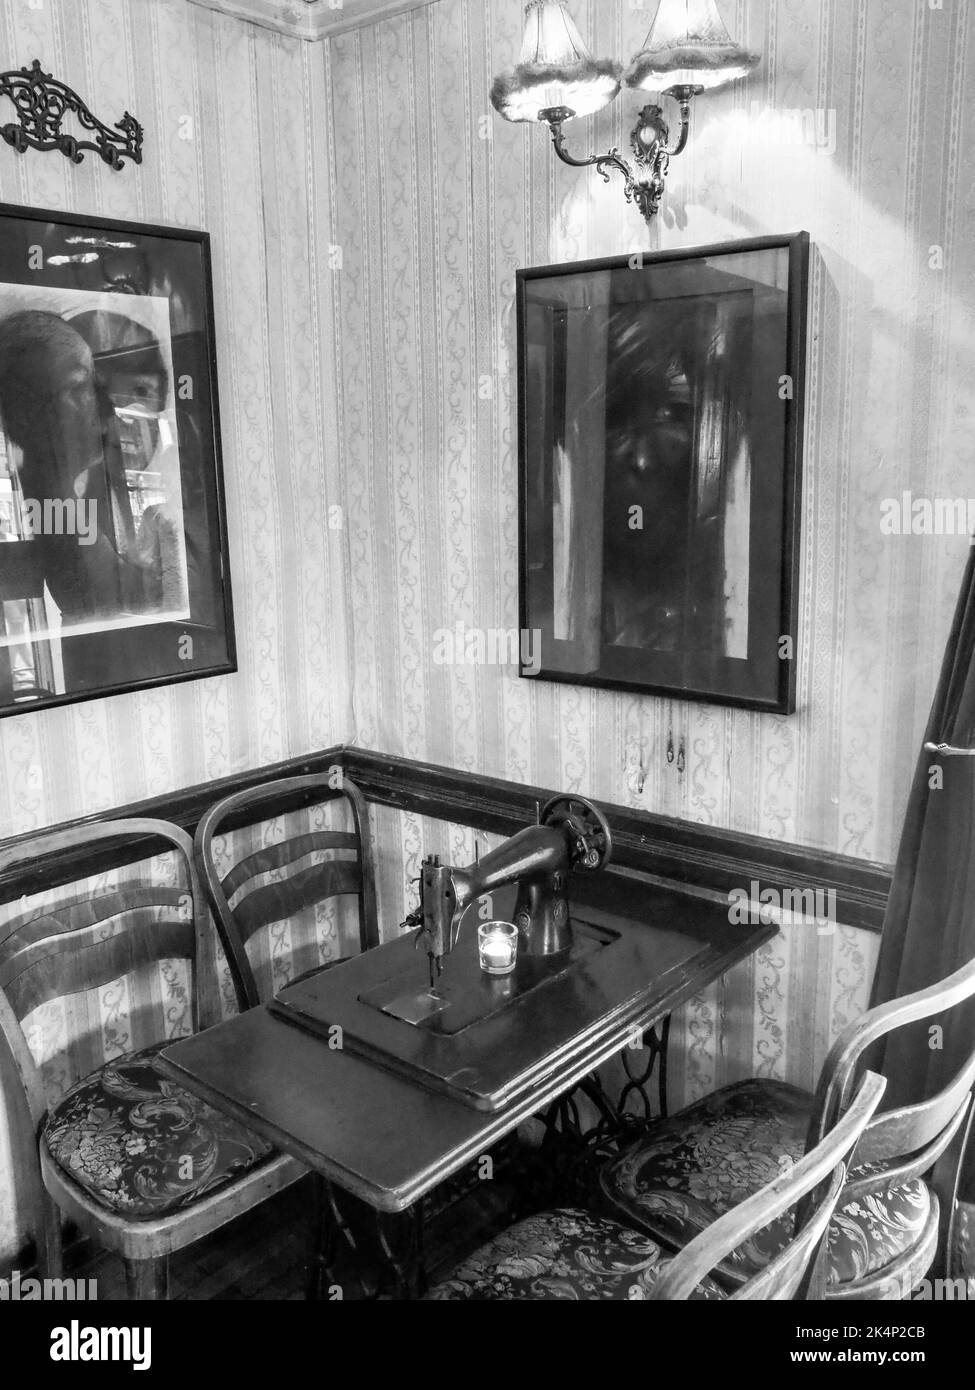 Krakow, Poland - August 4, 2018: Singer klub café with sewing machines as coffee tables Stock Photo